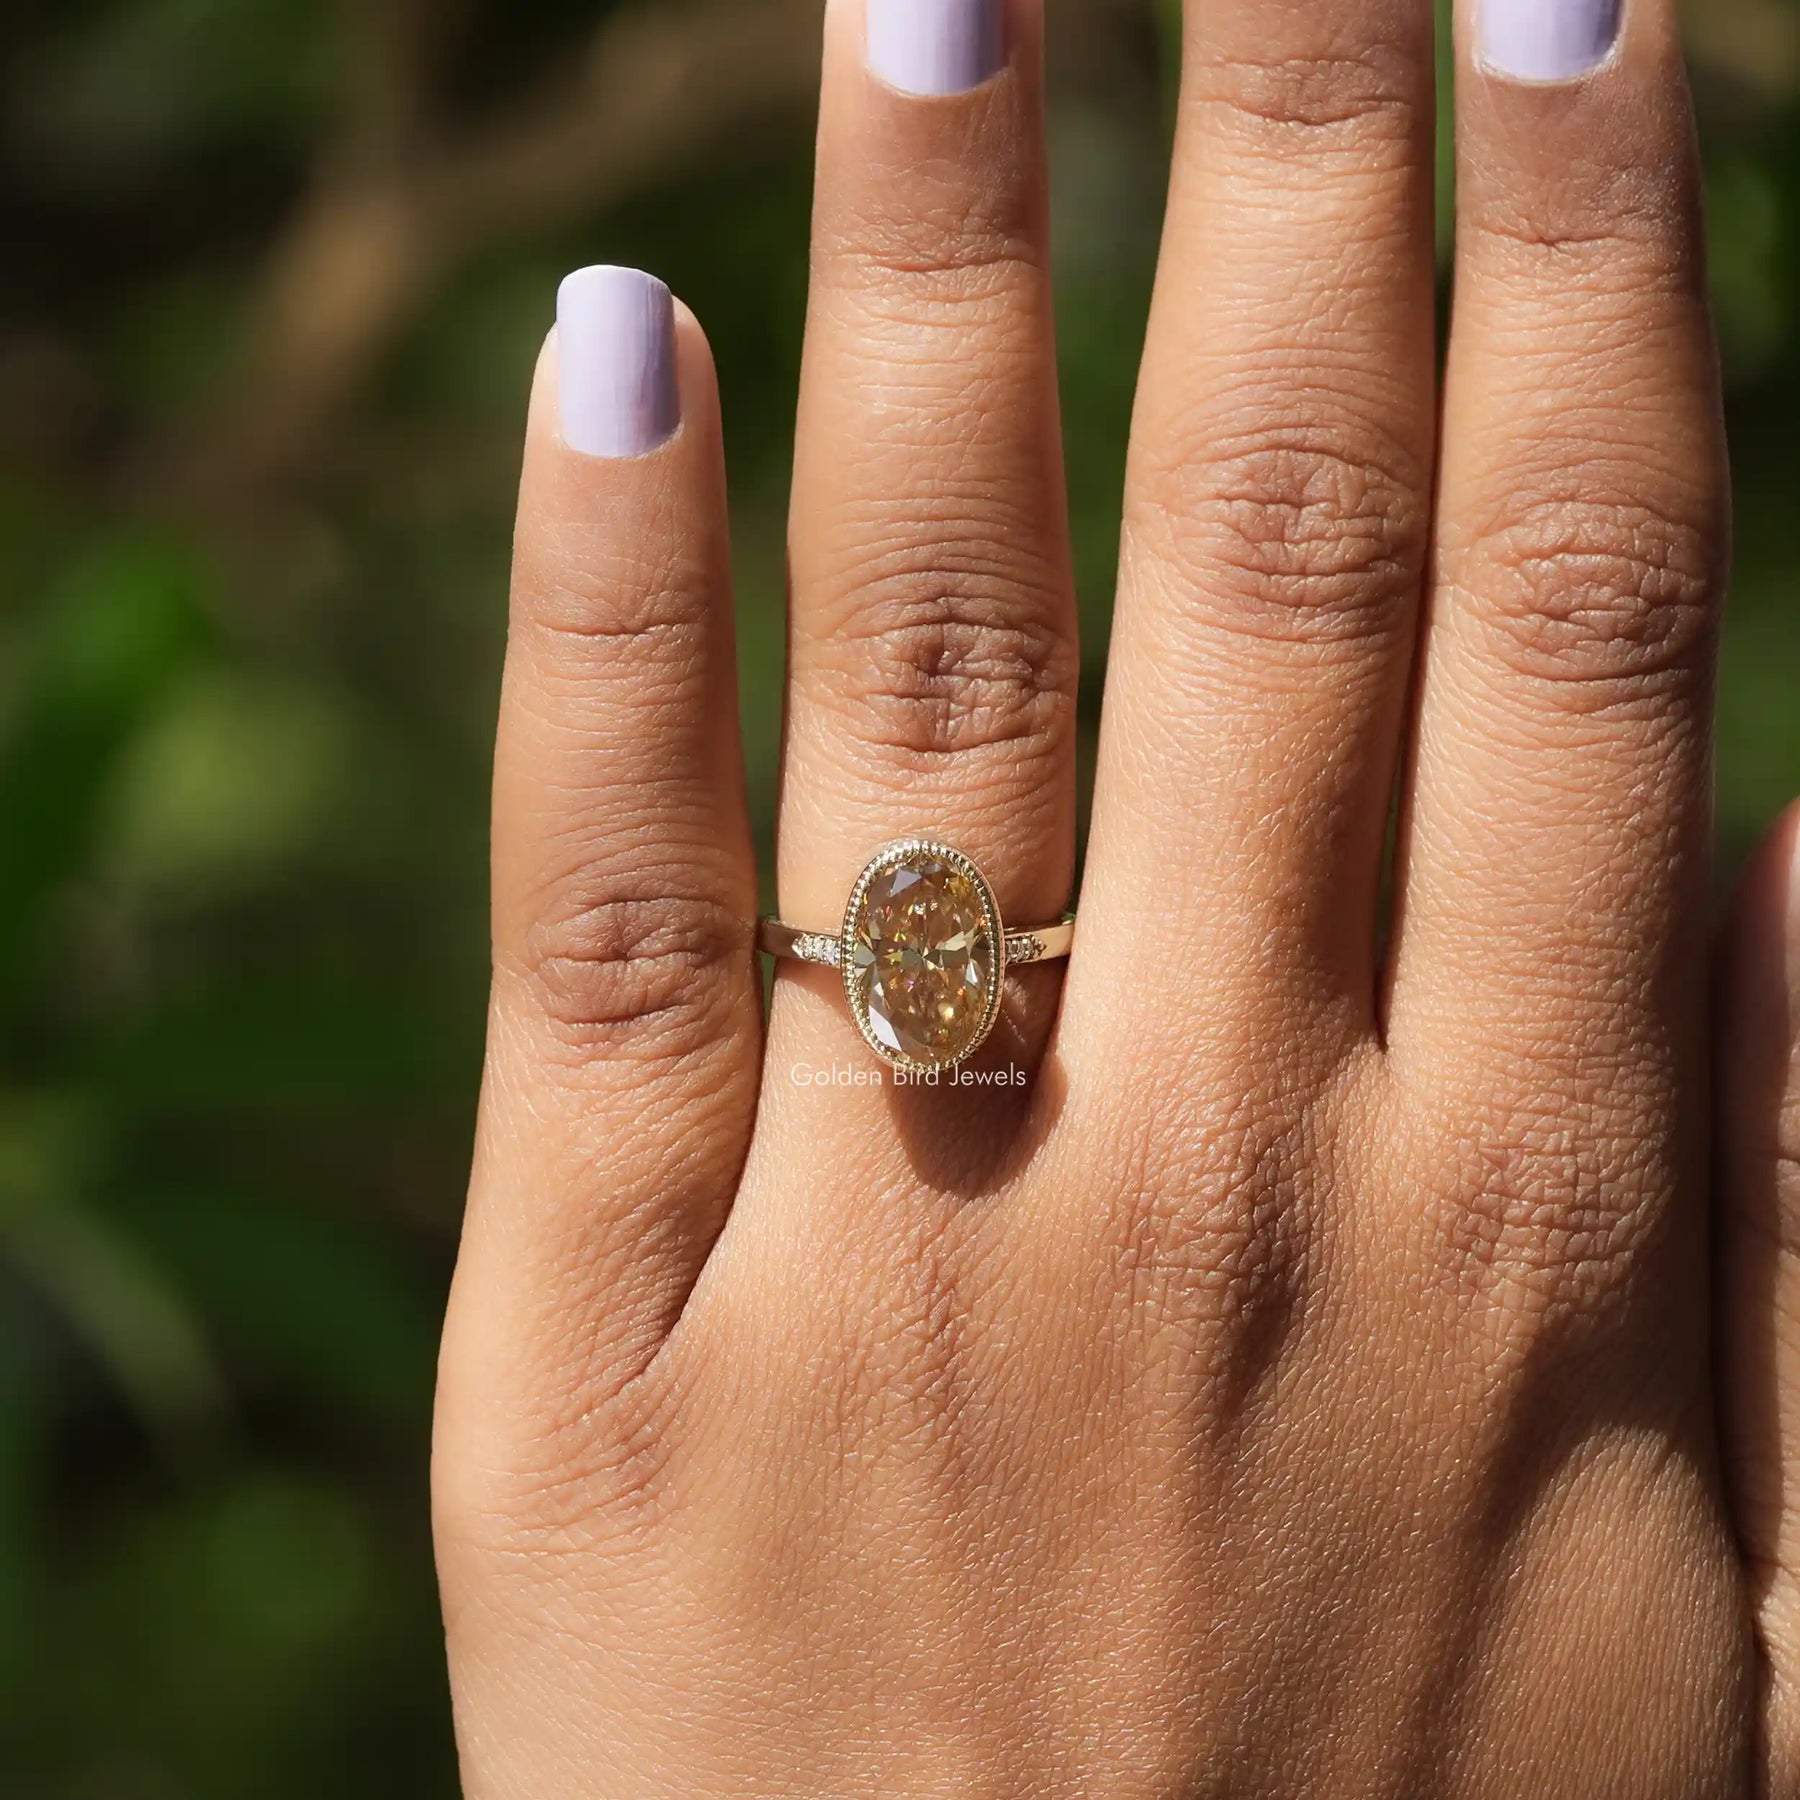 [Moissanite Oval Cut Solitaire Accent Stone Ring]-[Golden Bird Jewels]